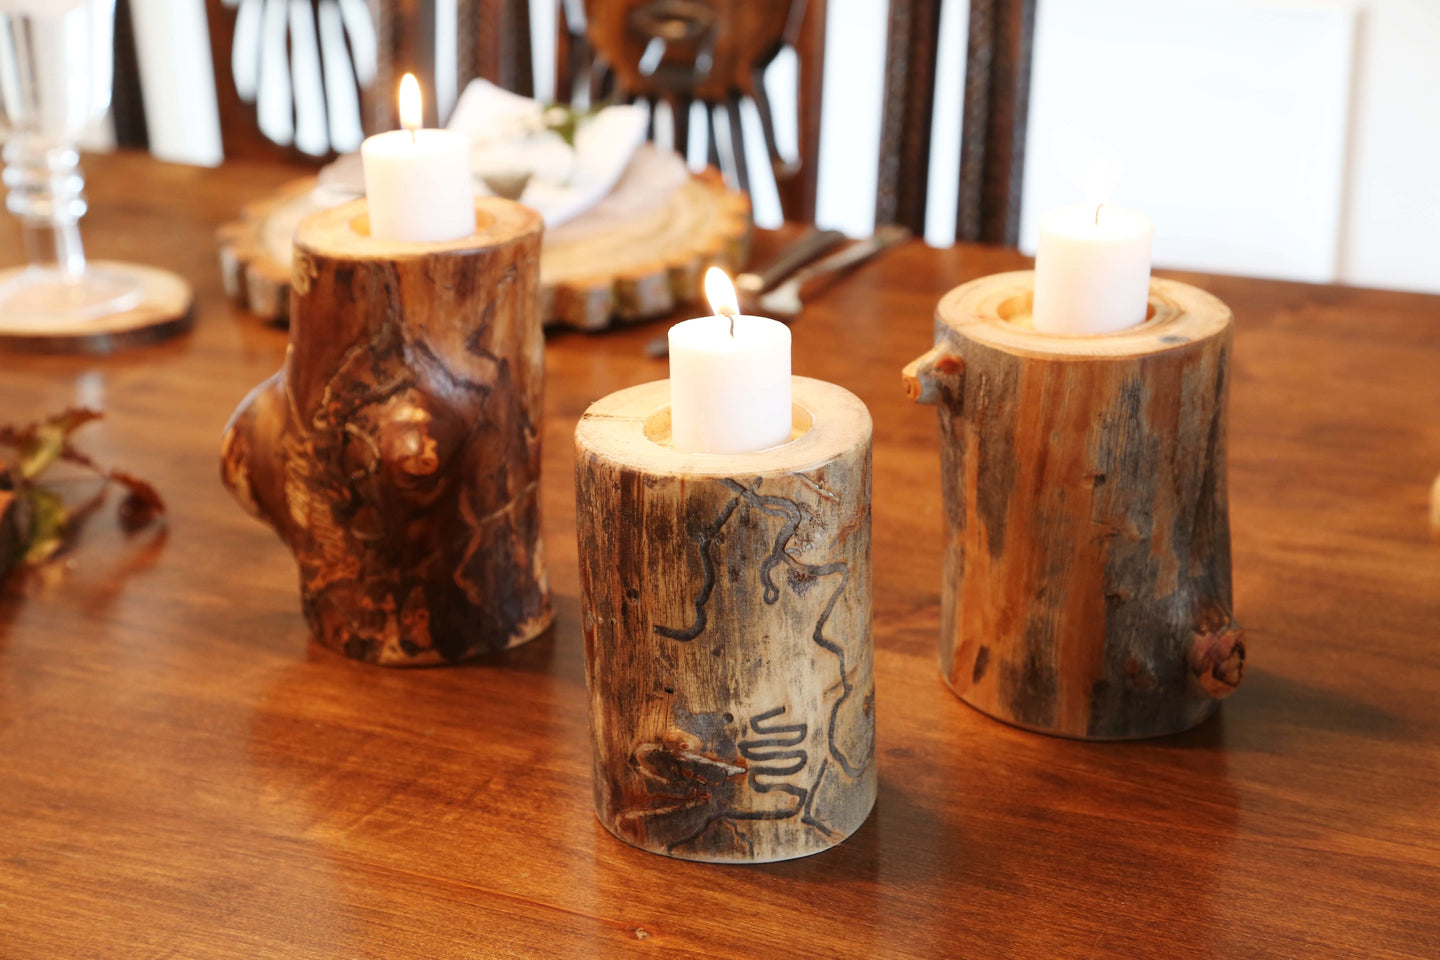 Gorgeous handcrafted solid wood modern live edge bark aspen quakie candle holder. Made in the U.S.A. these candle holders are very classy and elegant. Sure to be a conversation piece in any home or cabin. Use these chargers to place plates on to complete your dining, coffee or end table. 